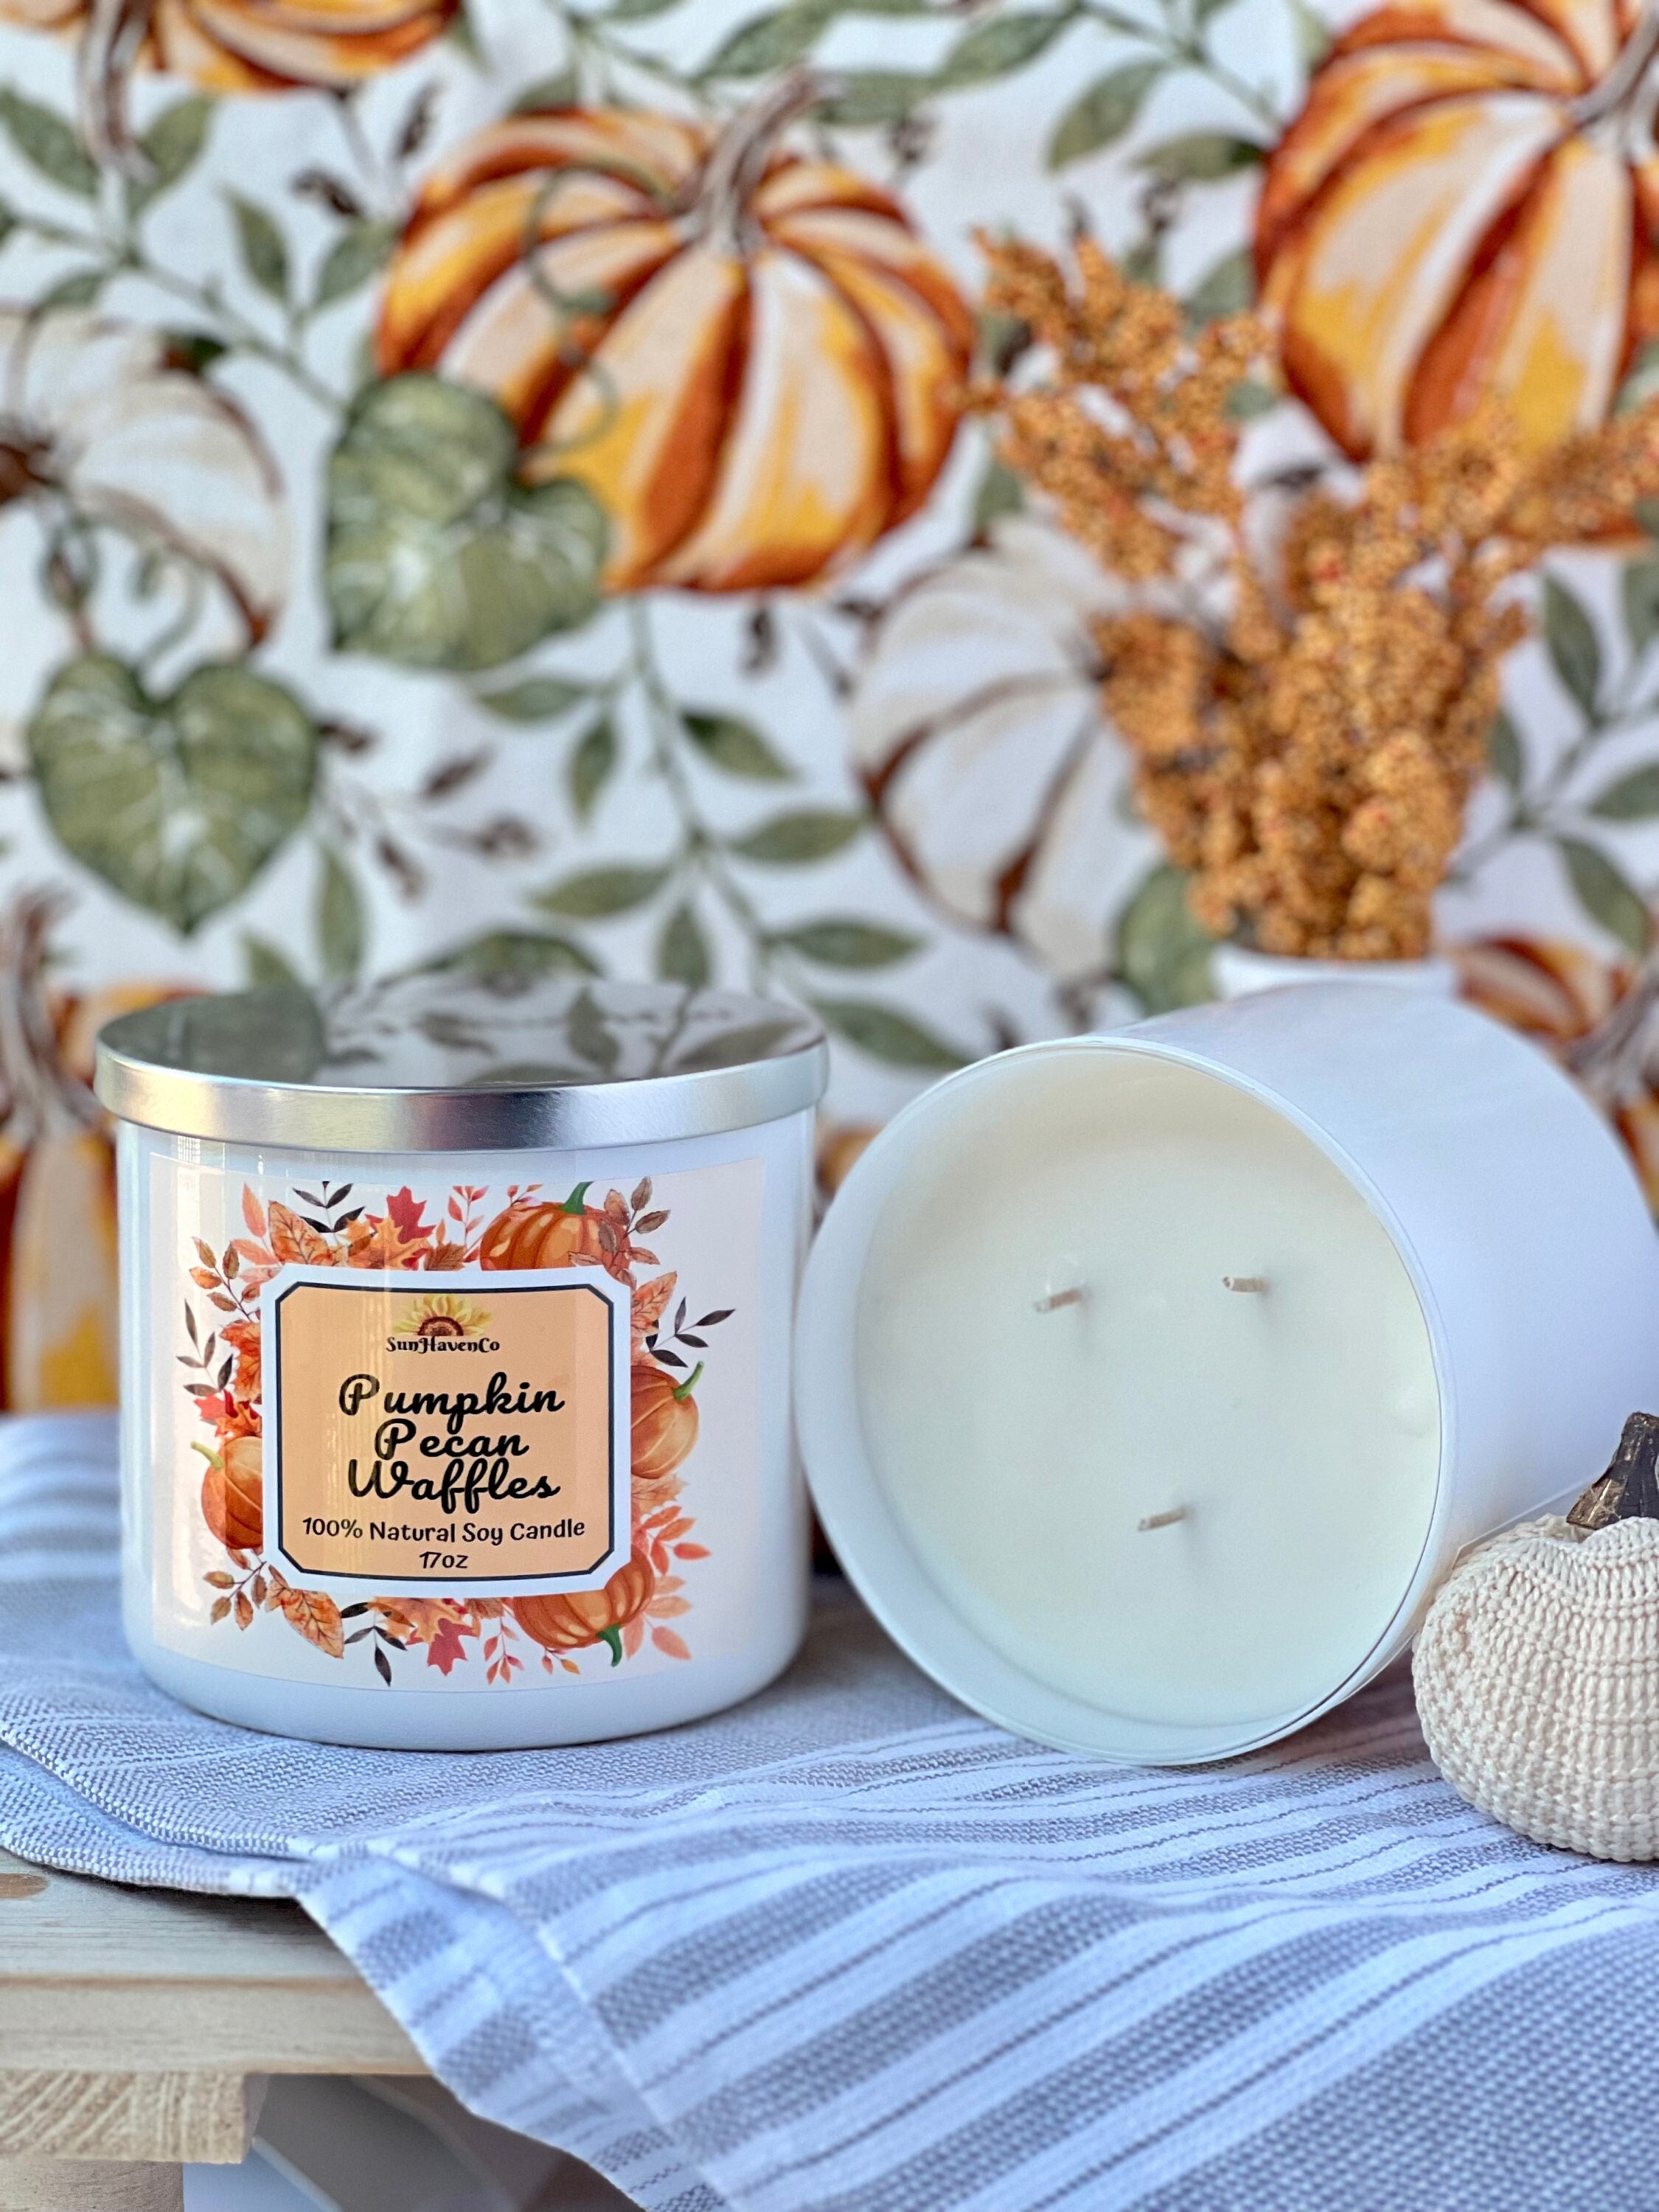 Pumpkin Pecan Waffles Soy Wax Candle Natural Soy Wax Candle picture